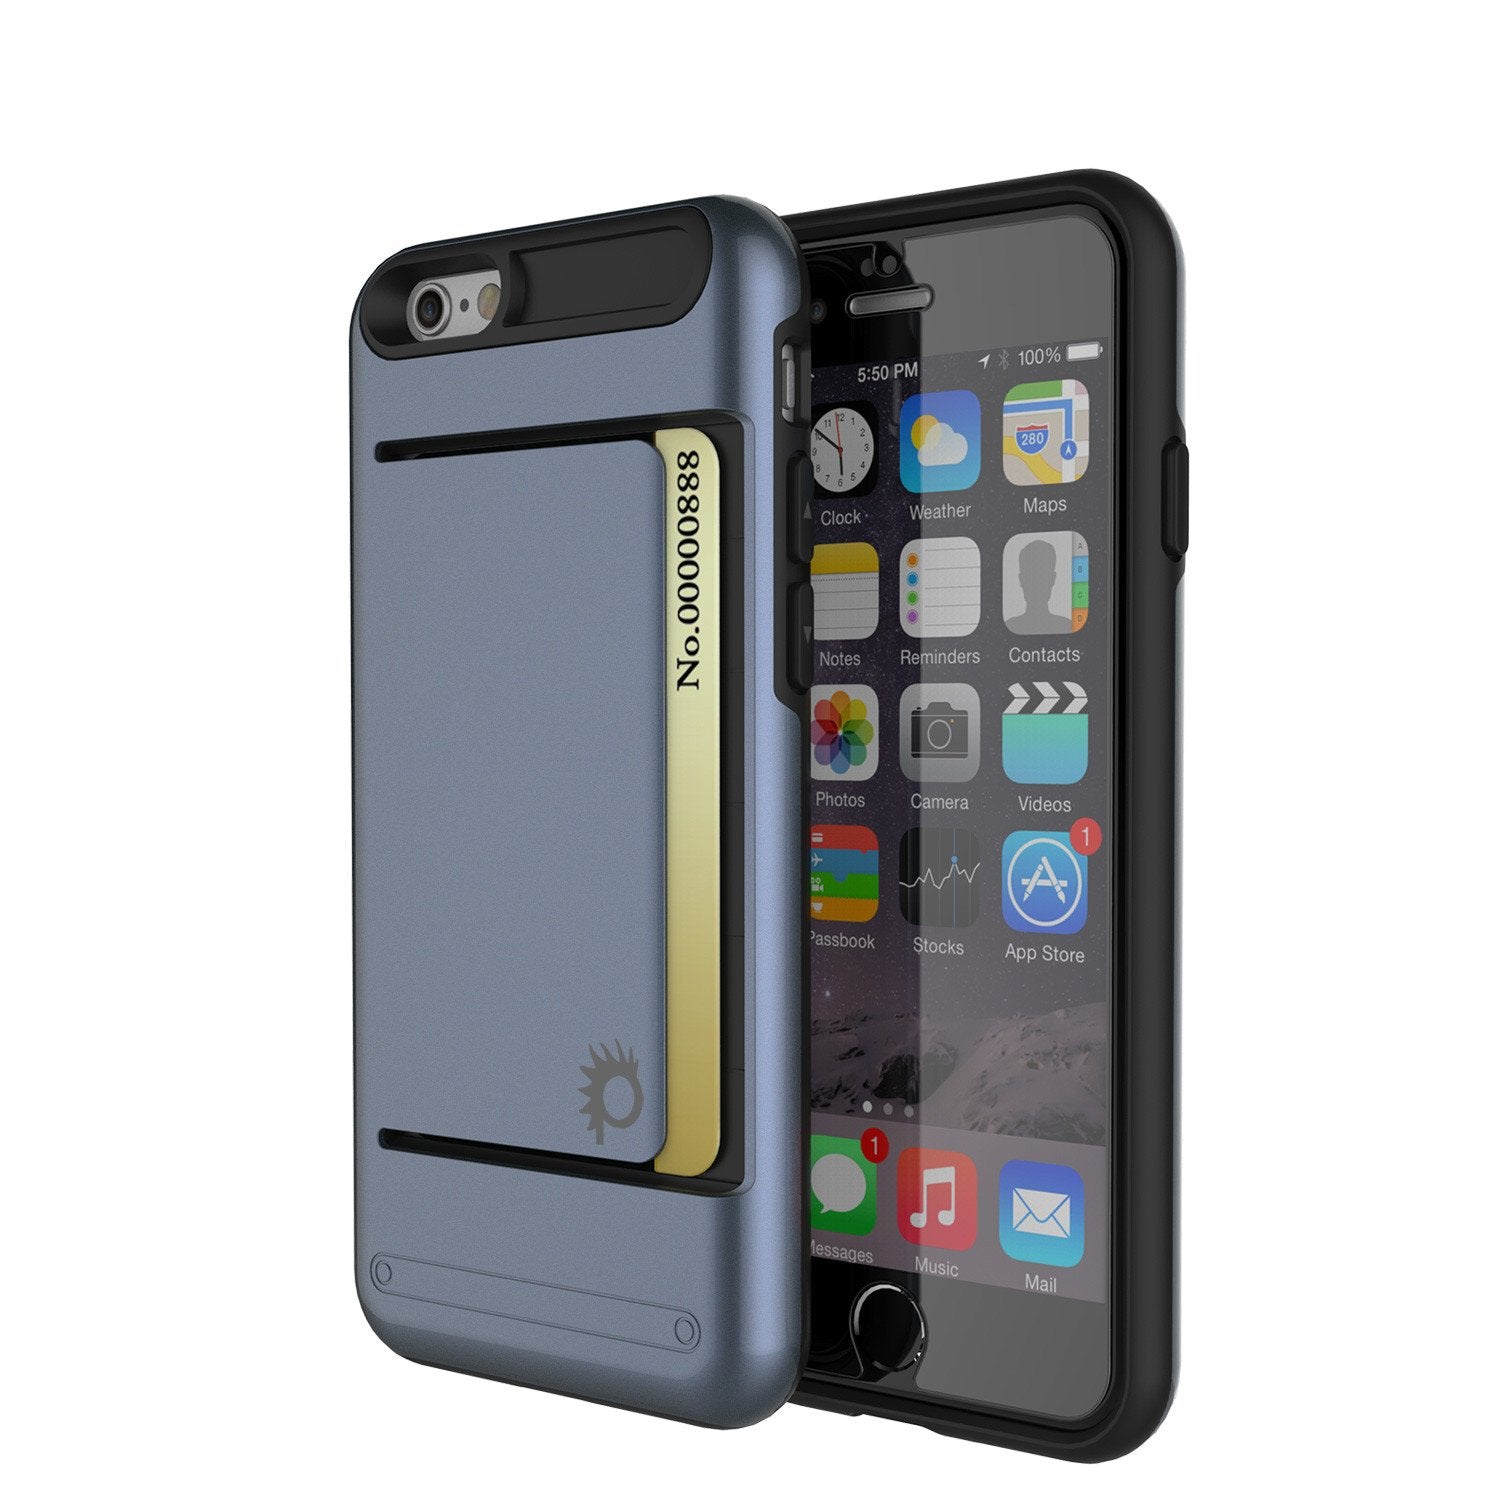 iPhone 6/6s Case PunkCase CLUTCH Navy Series Slim Armor Soft Cover Case w/ Tempered Glass